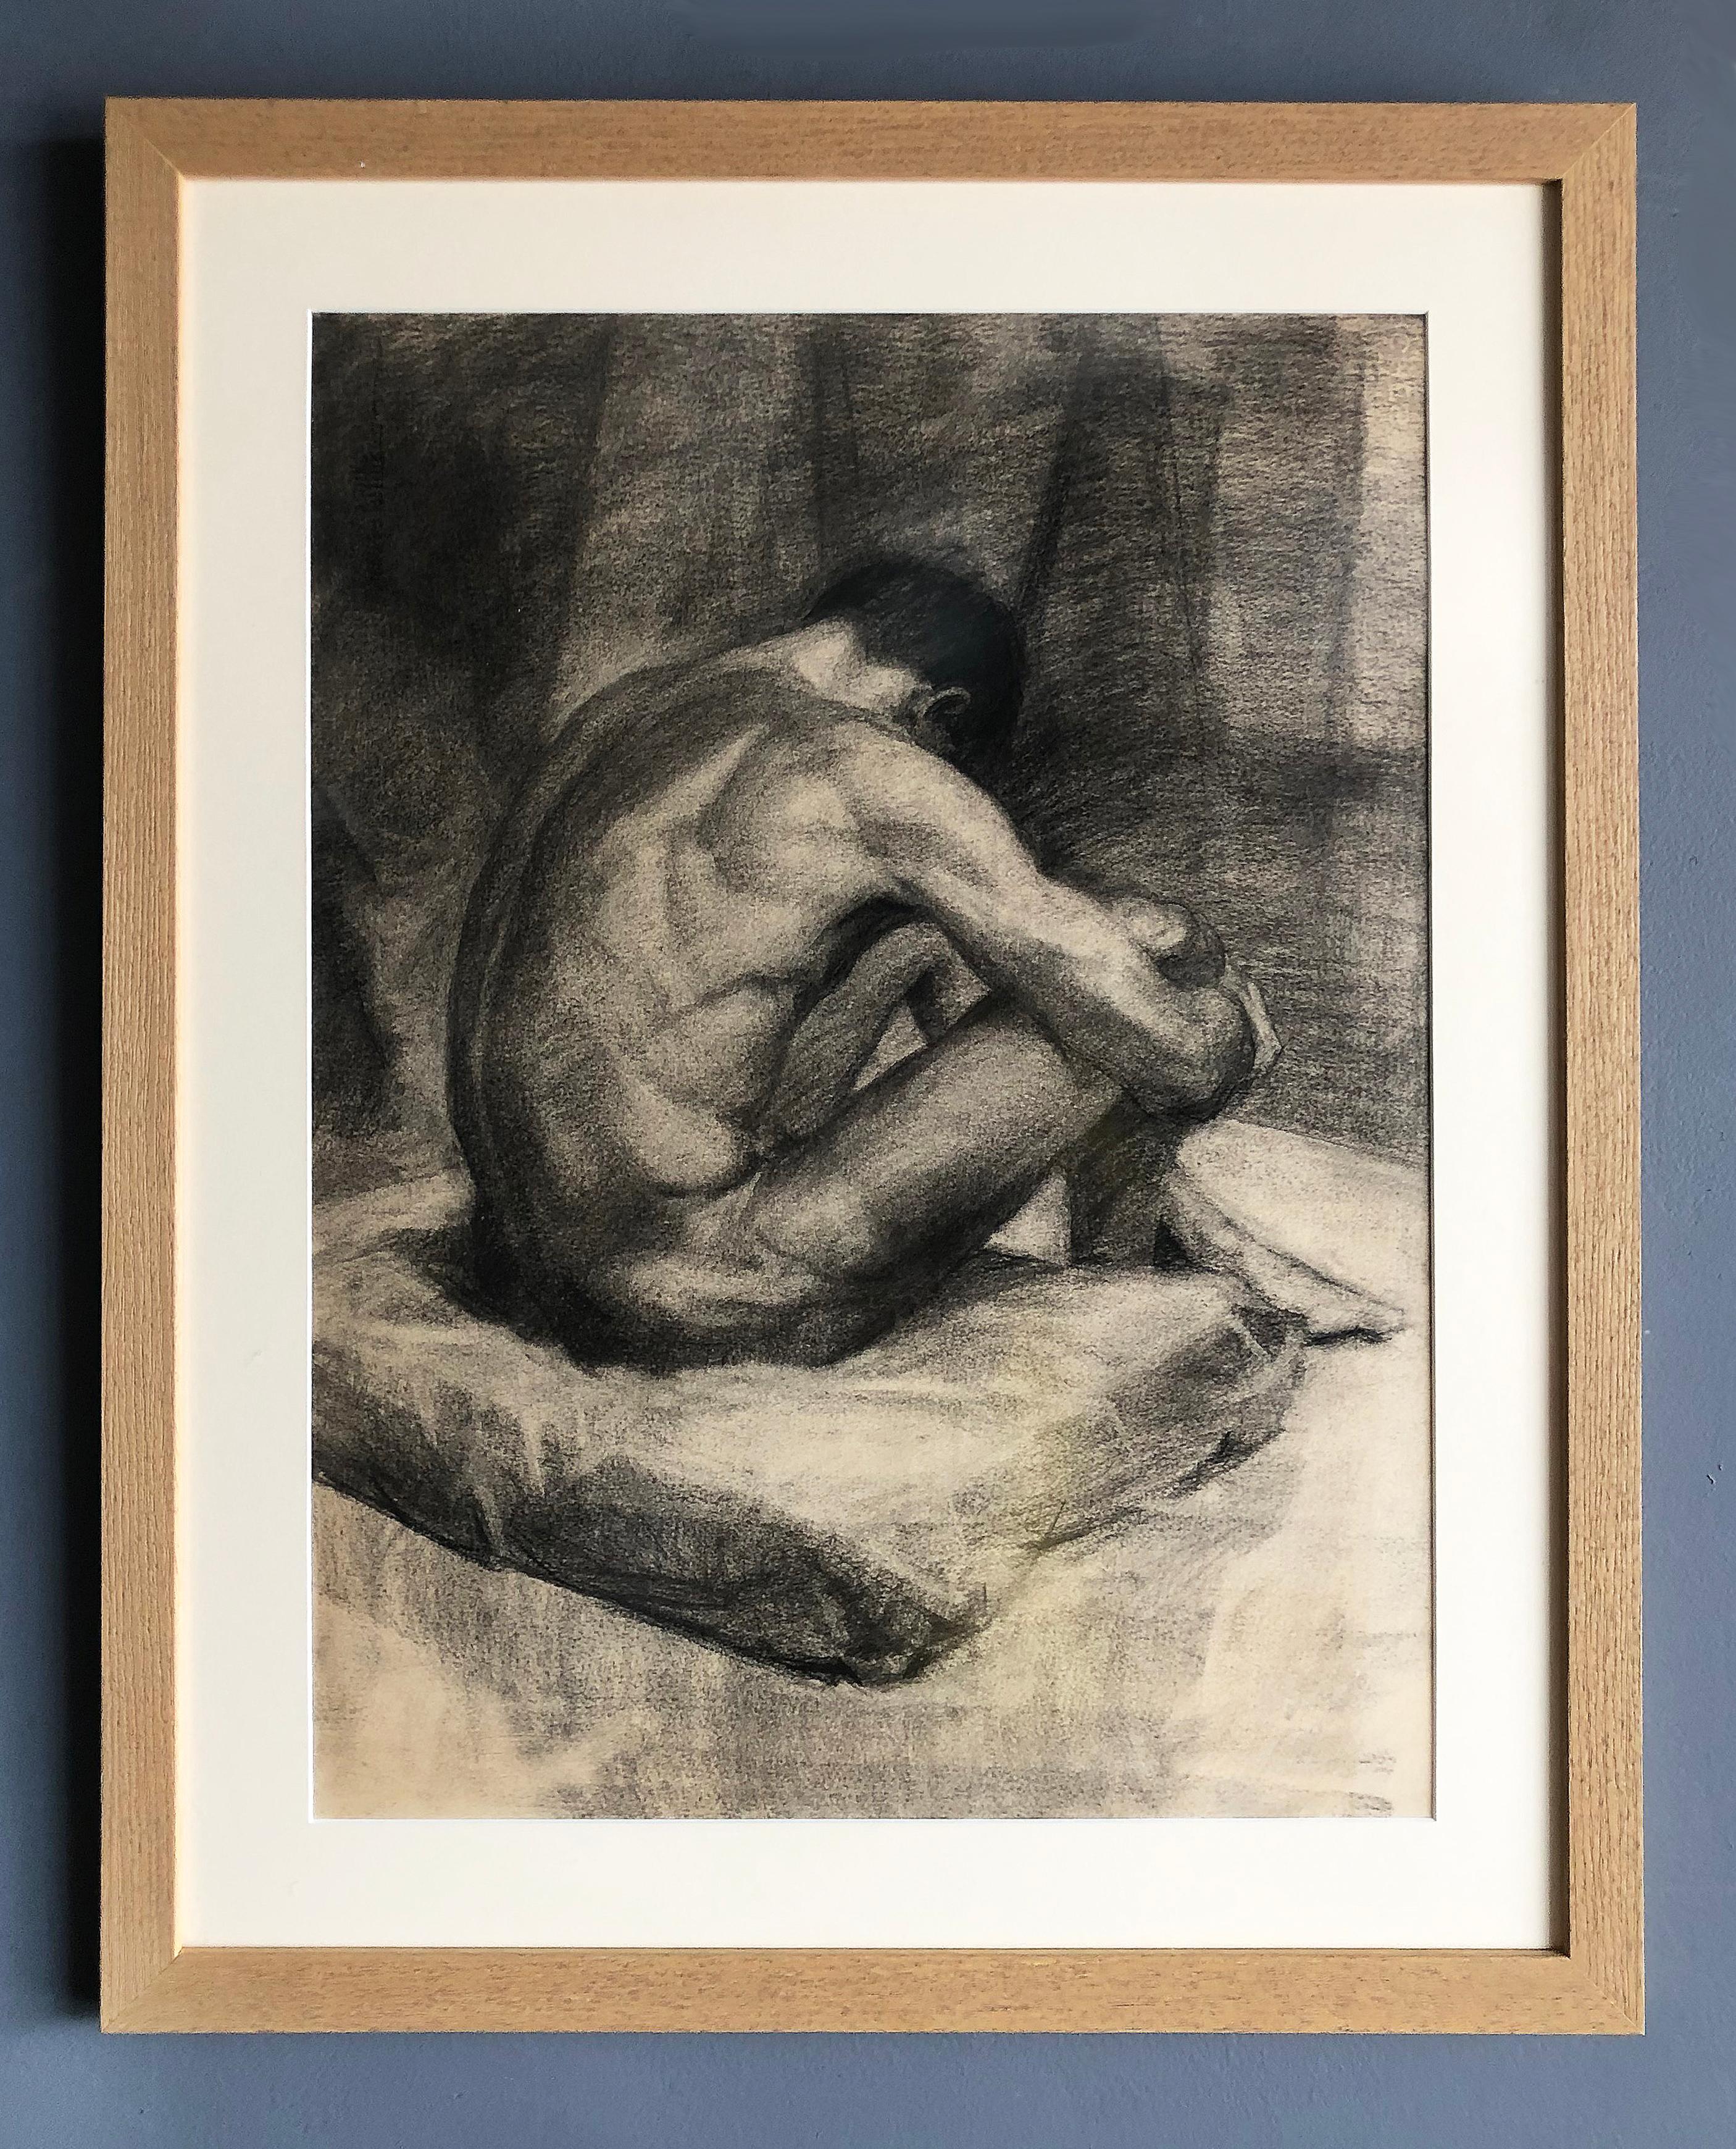 1940s male nude art study drawing in charcoal on paper

Offered for sale is an original 1940s male nude study drawing in charcoal on paper. The work has been newly matted and framed under non-glare plexiglass.

Measures: 24